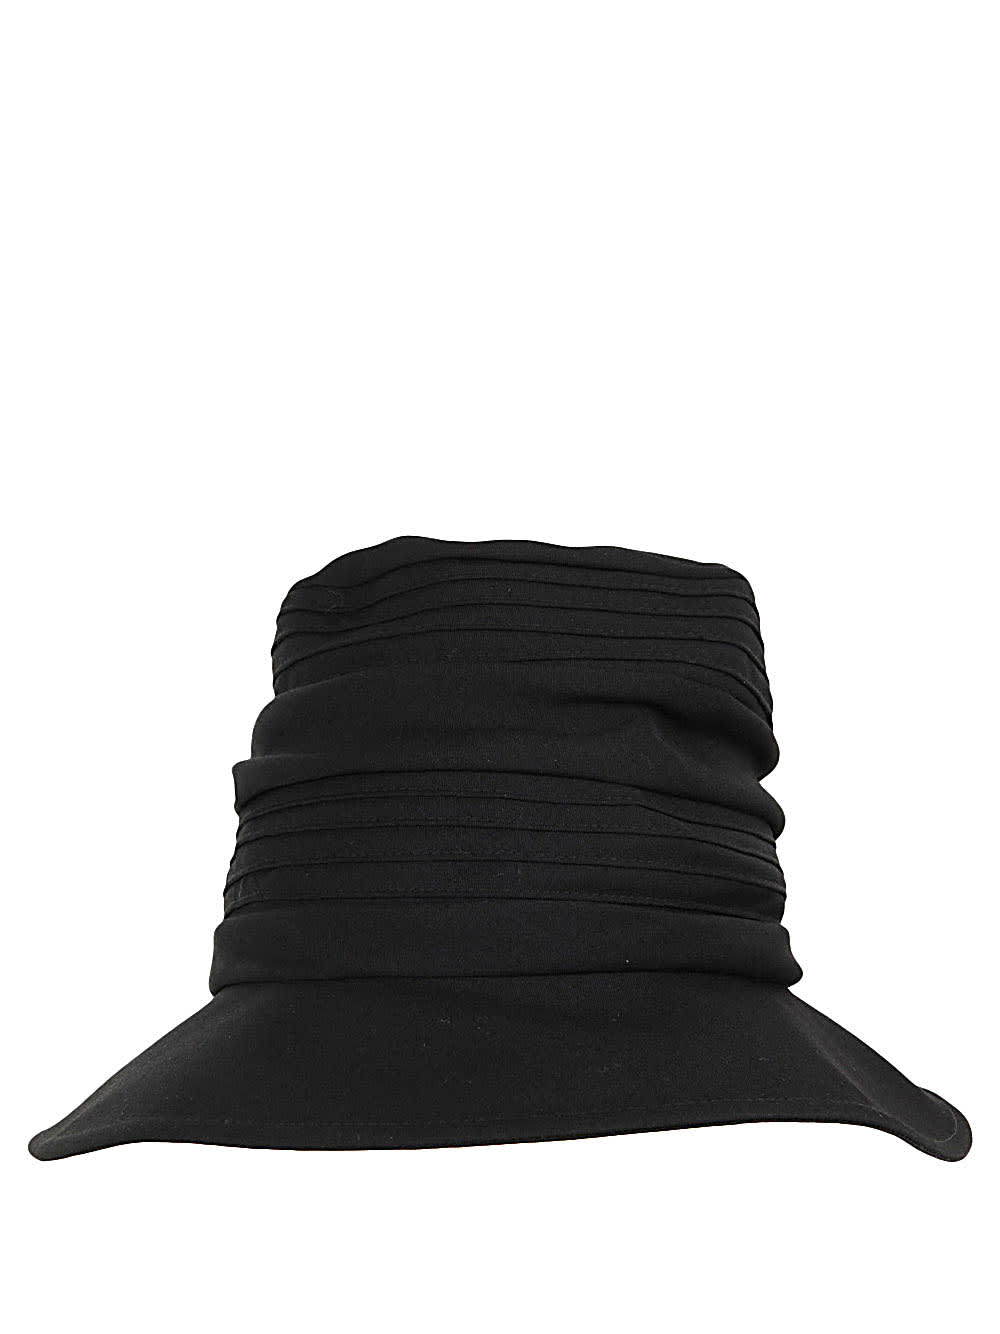 Y's Patched Cloche Hat